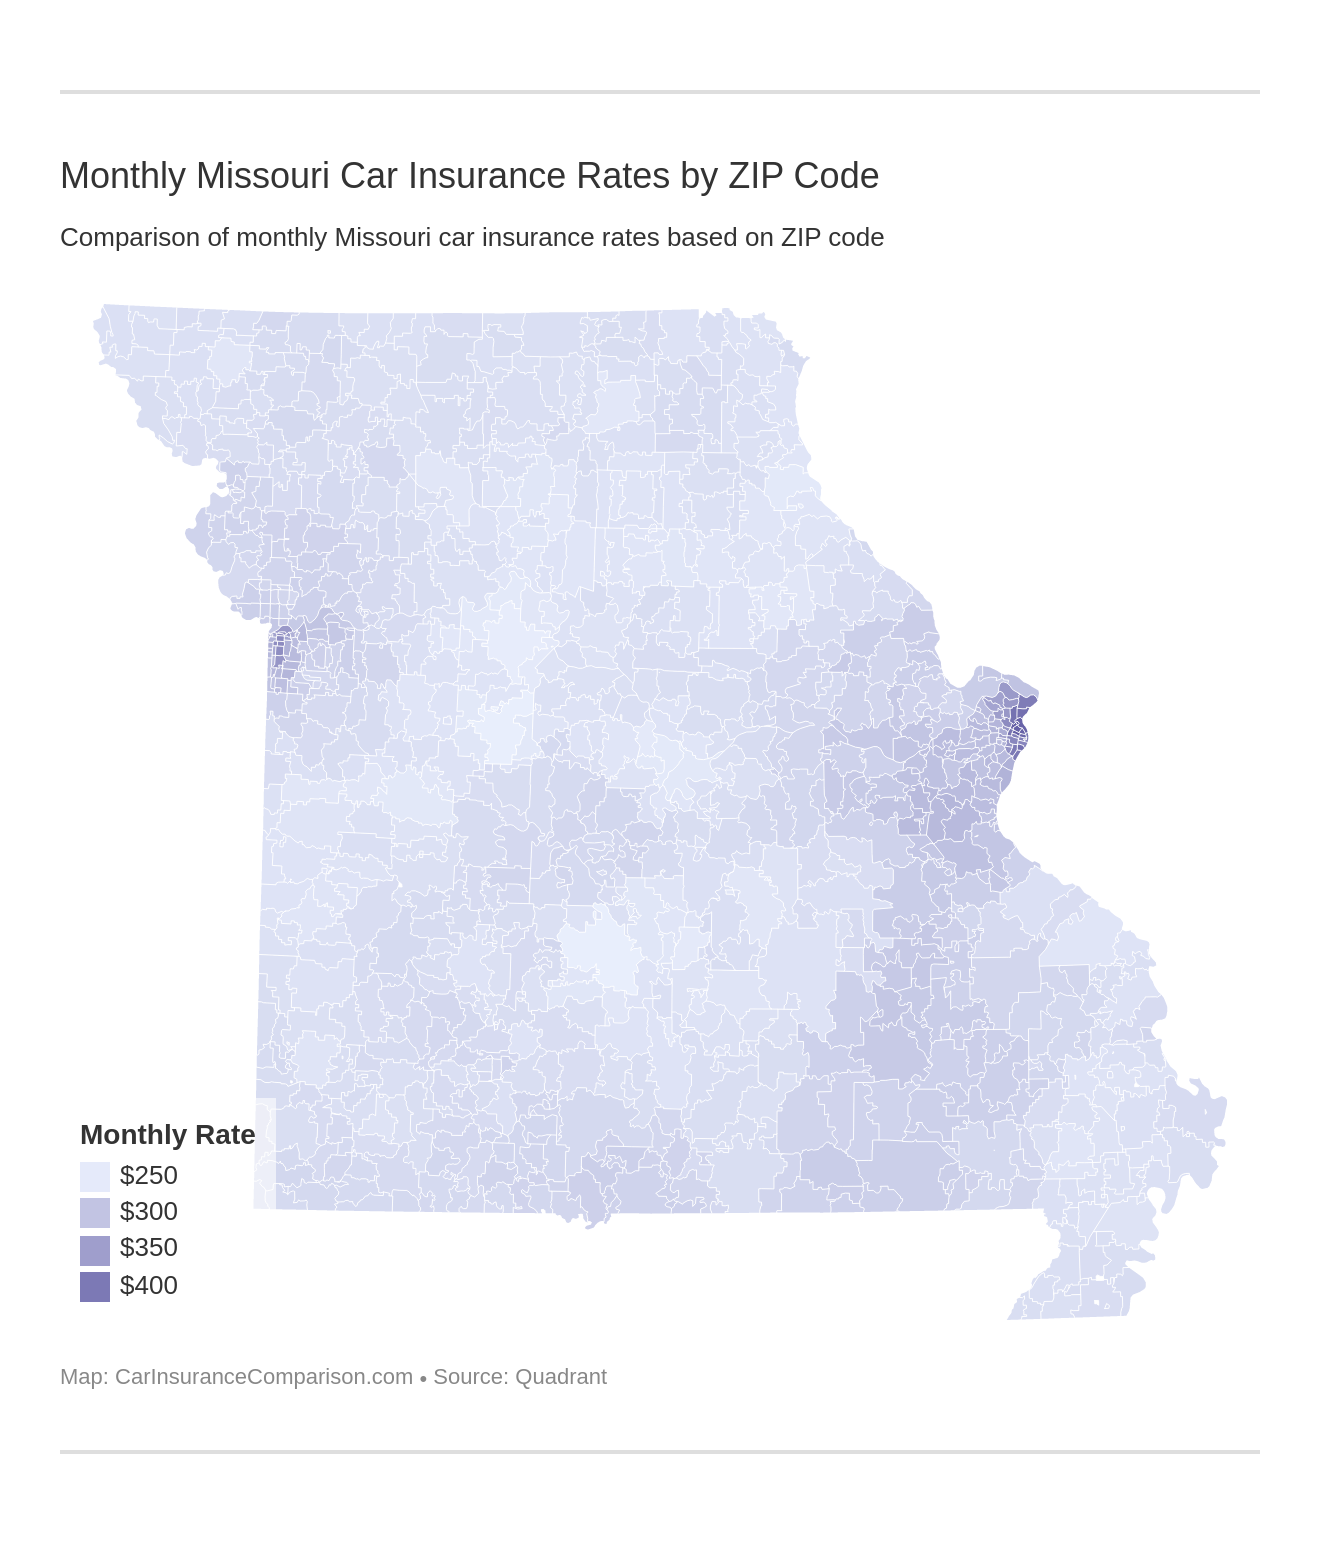 Monthly Missouri Car Insurance Rates by ZIP Code